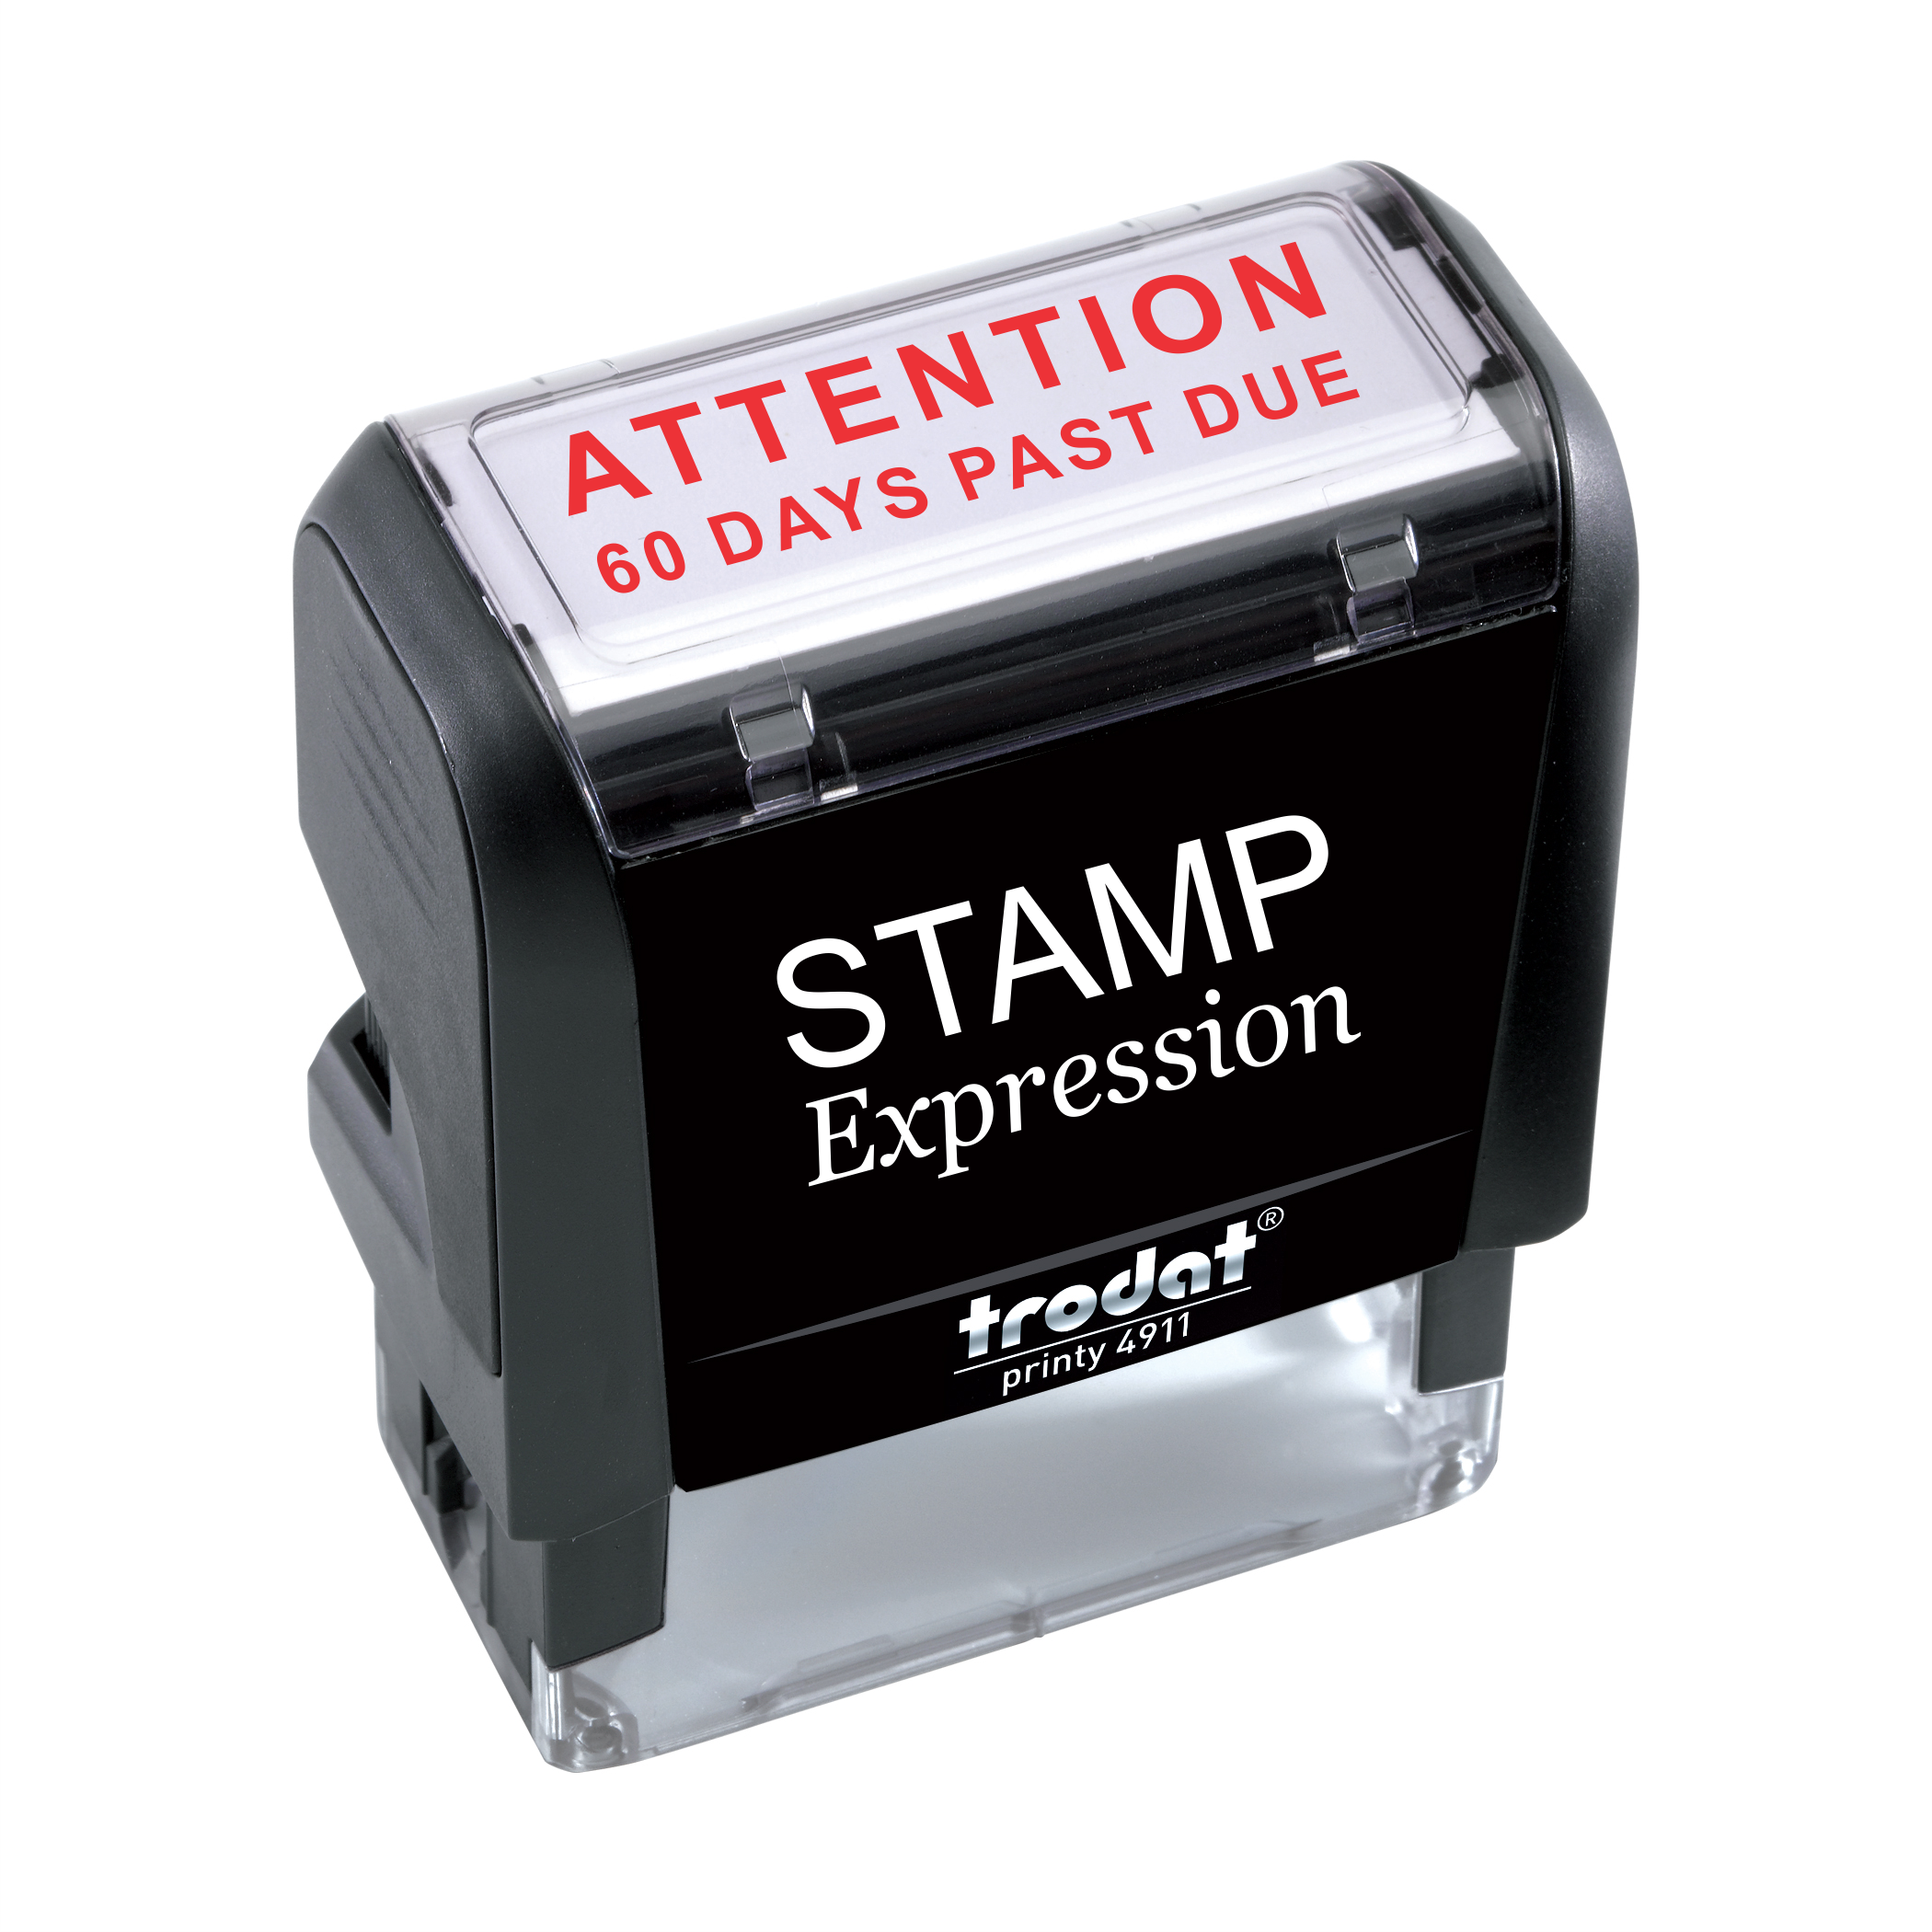 Attention 60 Days Past Due Office Self Inking Rubber Stamp